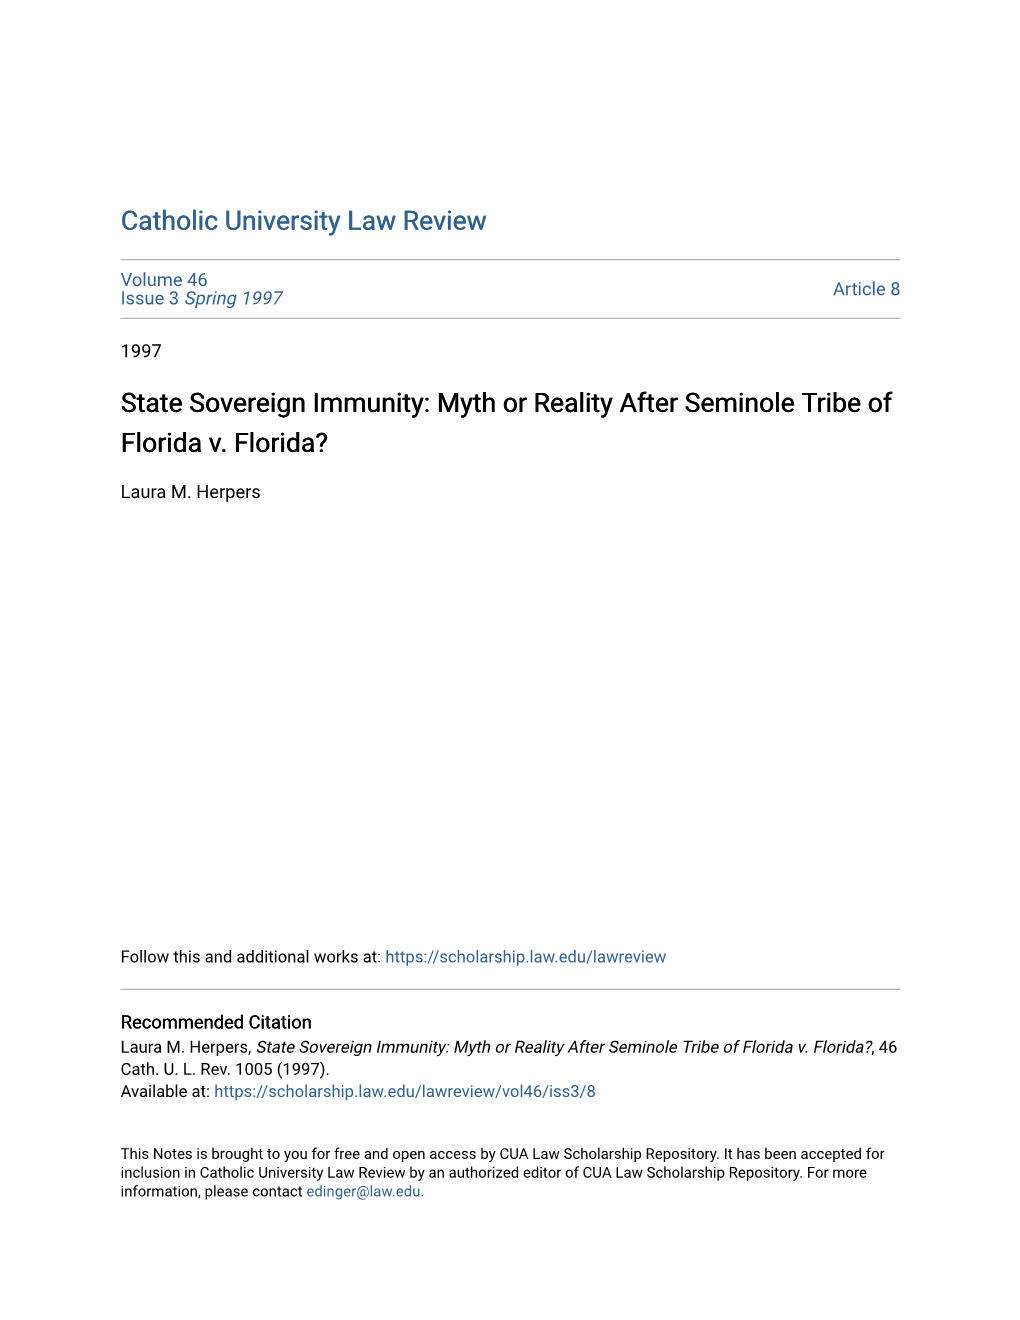 State Sovereign Immunity: Myth Or Reality After Seminole Tribe of Florida V